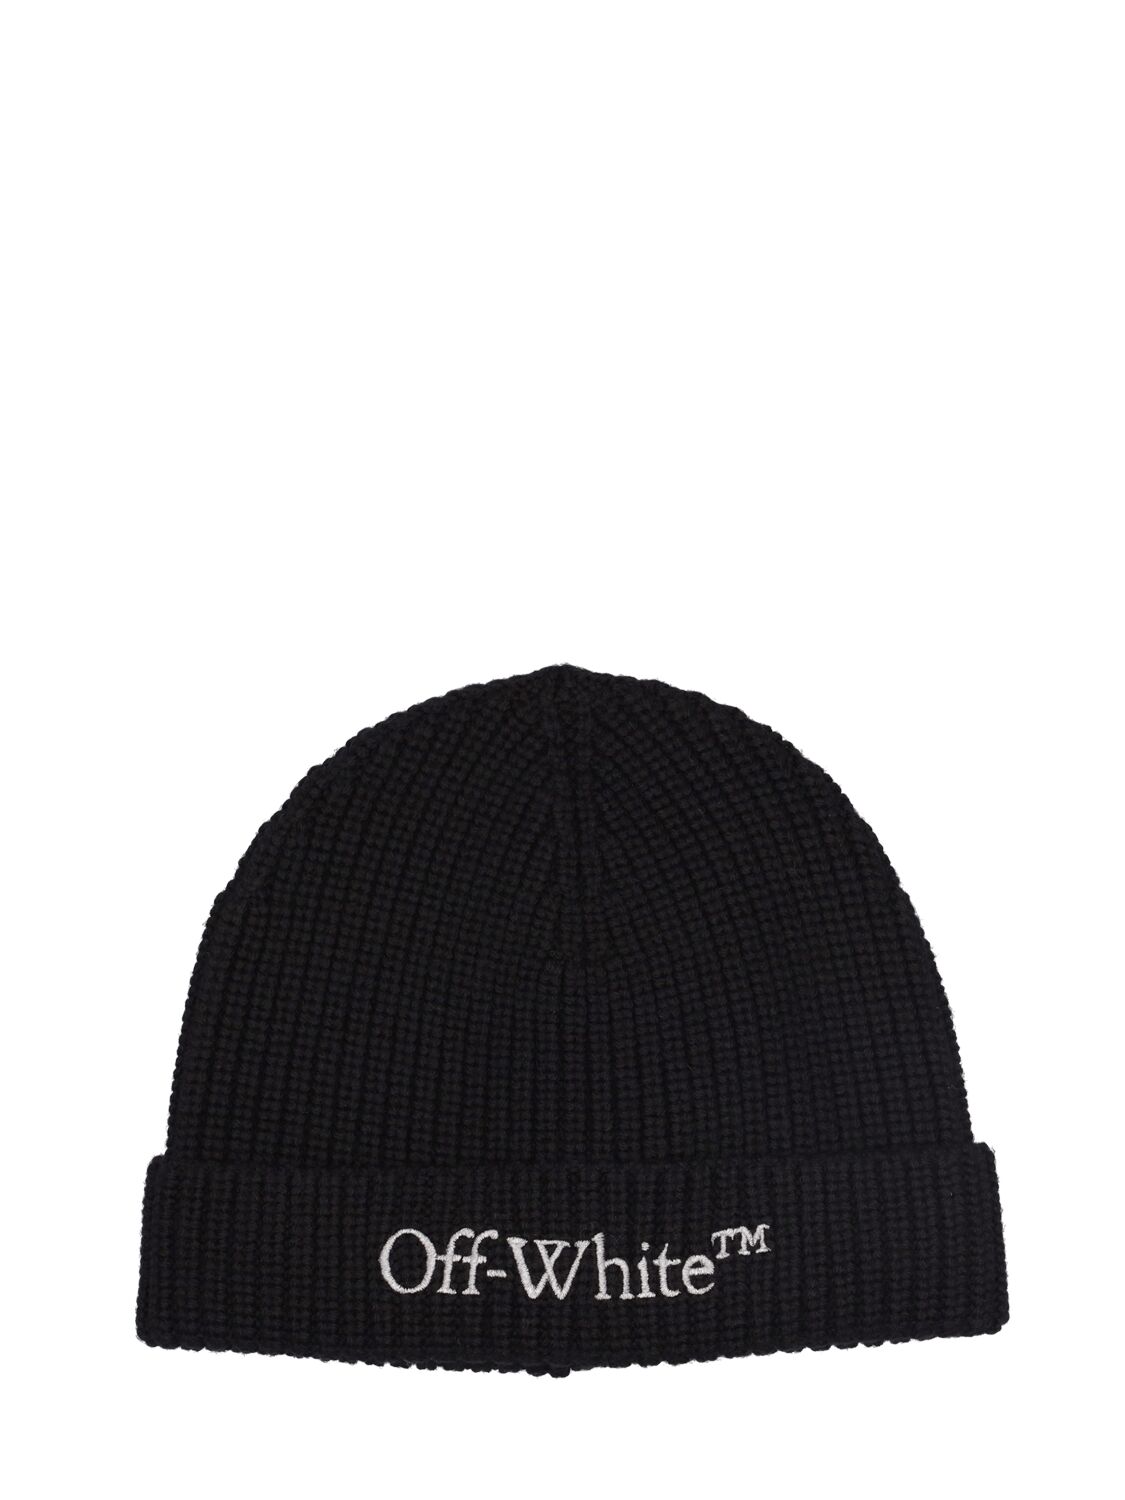 Image of Bookish Classic Knit Wool Beanie